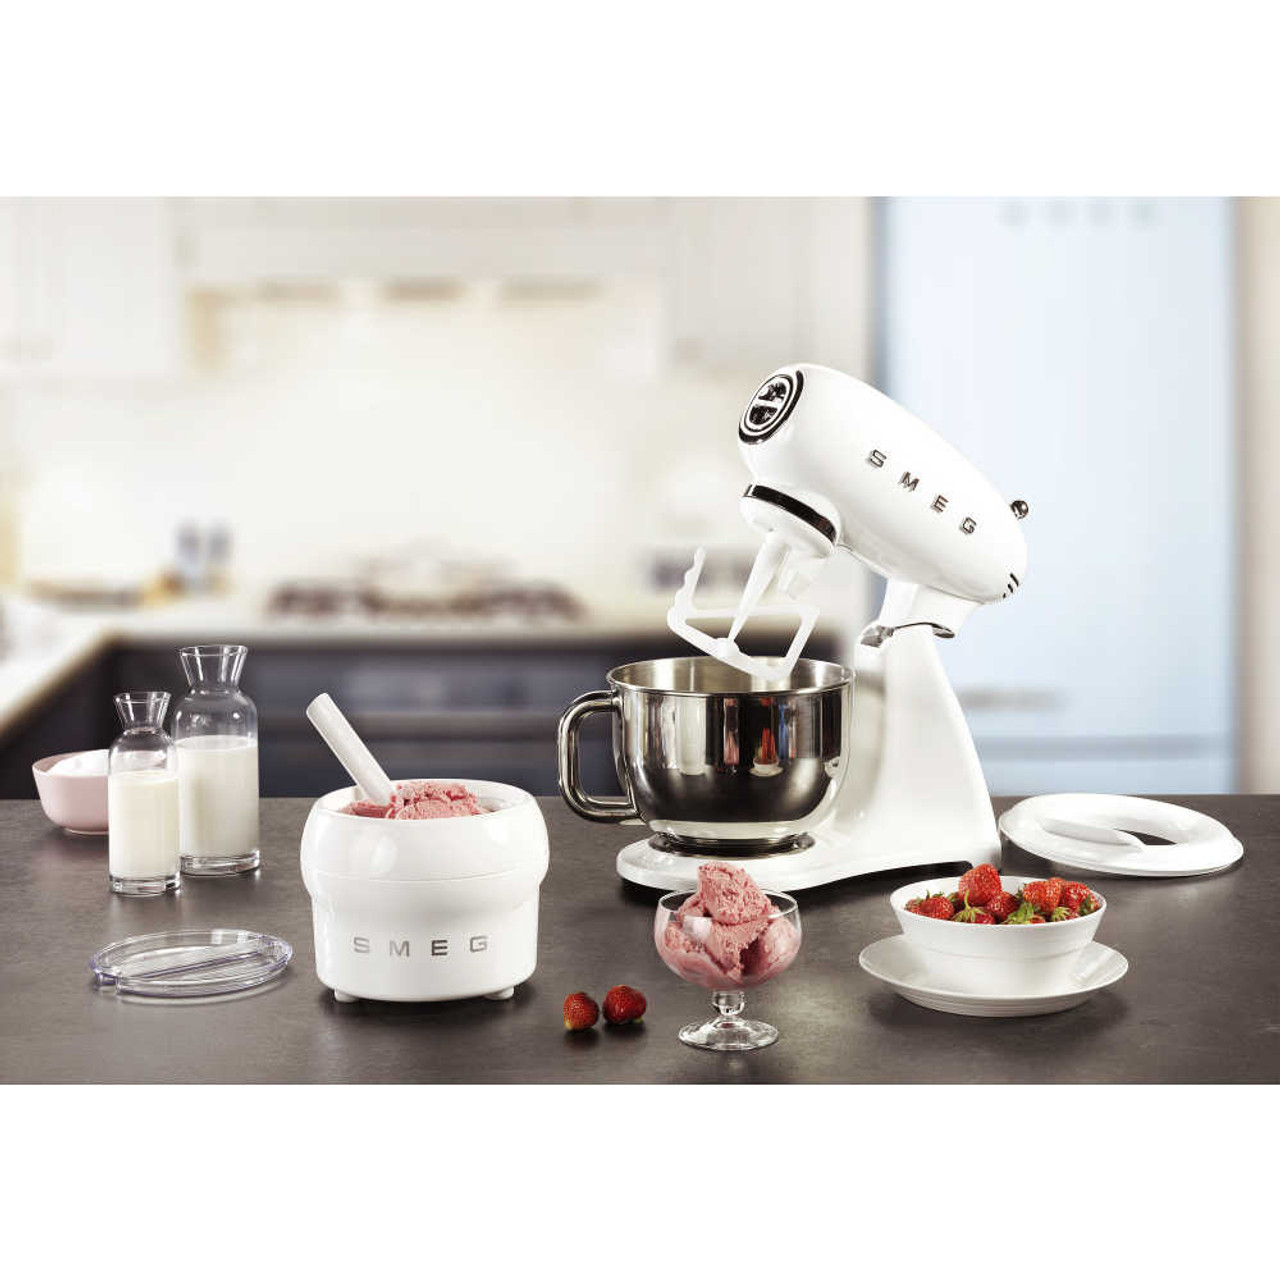 https://cdn11.bigcommerce.com/s-hccytny0od/images/stencil/1280x1280/products/4906/20619/SMEG_Stand_Mixer_Ice_Cream_Maker_Accessory_7__64005.1657670961.jpg?c=2?imbypass=on